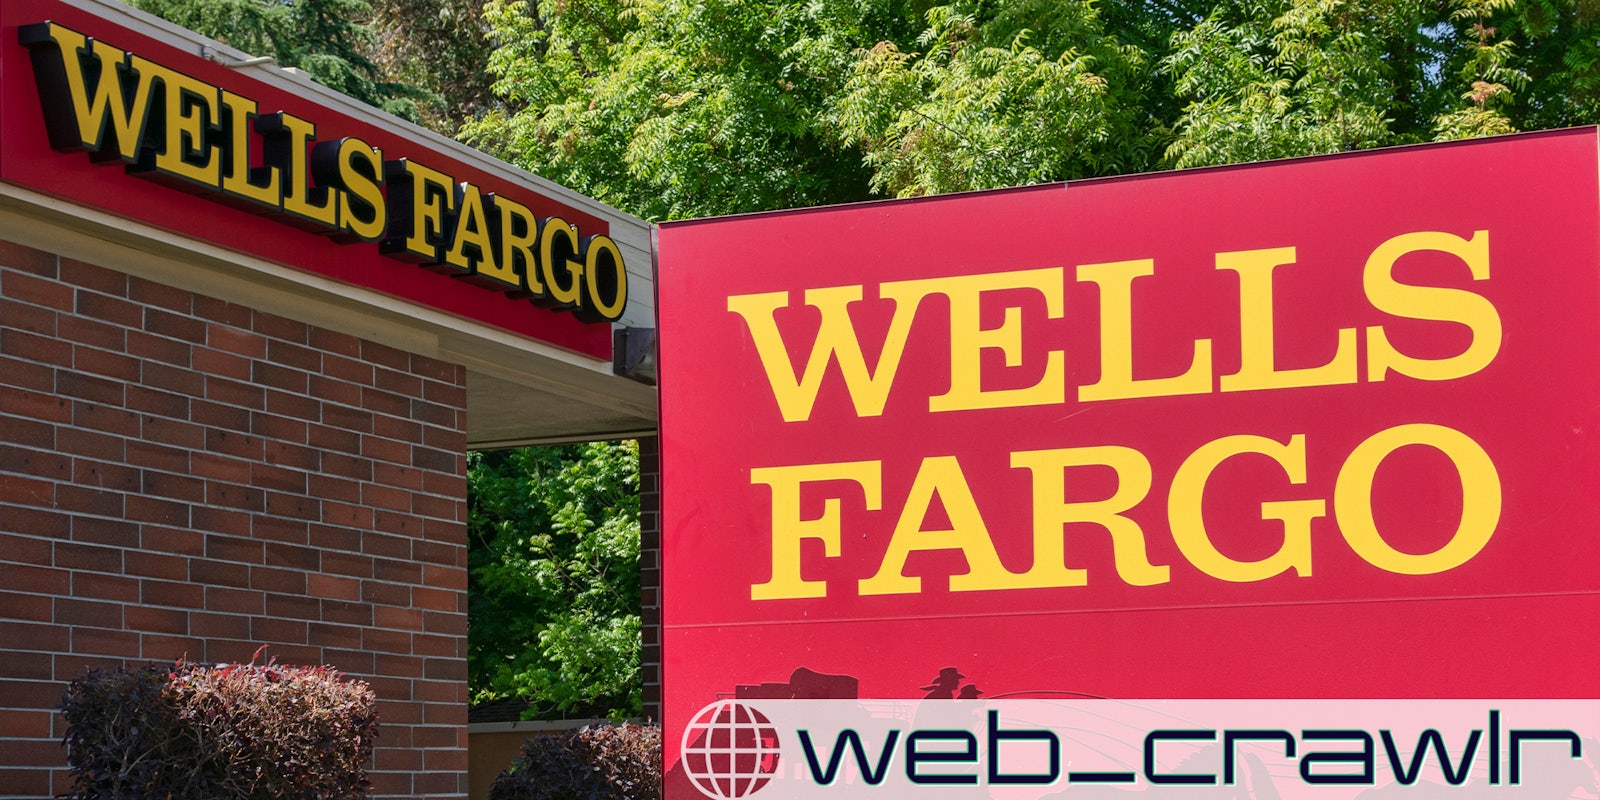 Wells Fargo sign and stagecoach logo near local bank branch